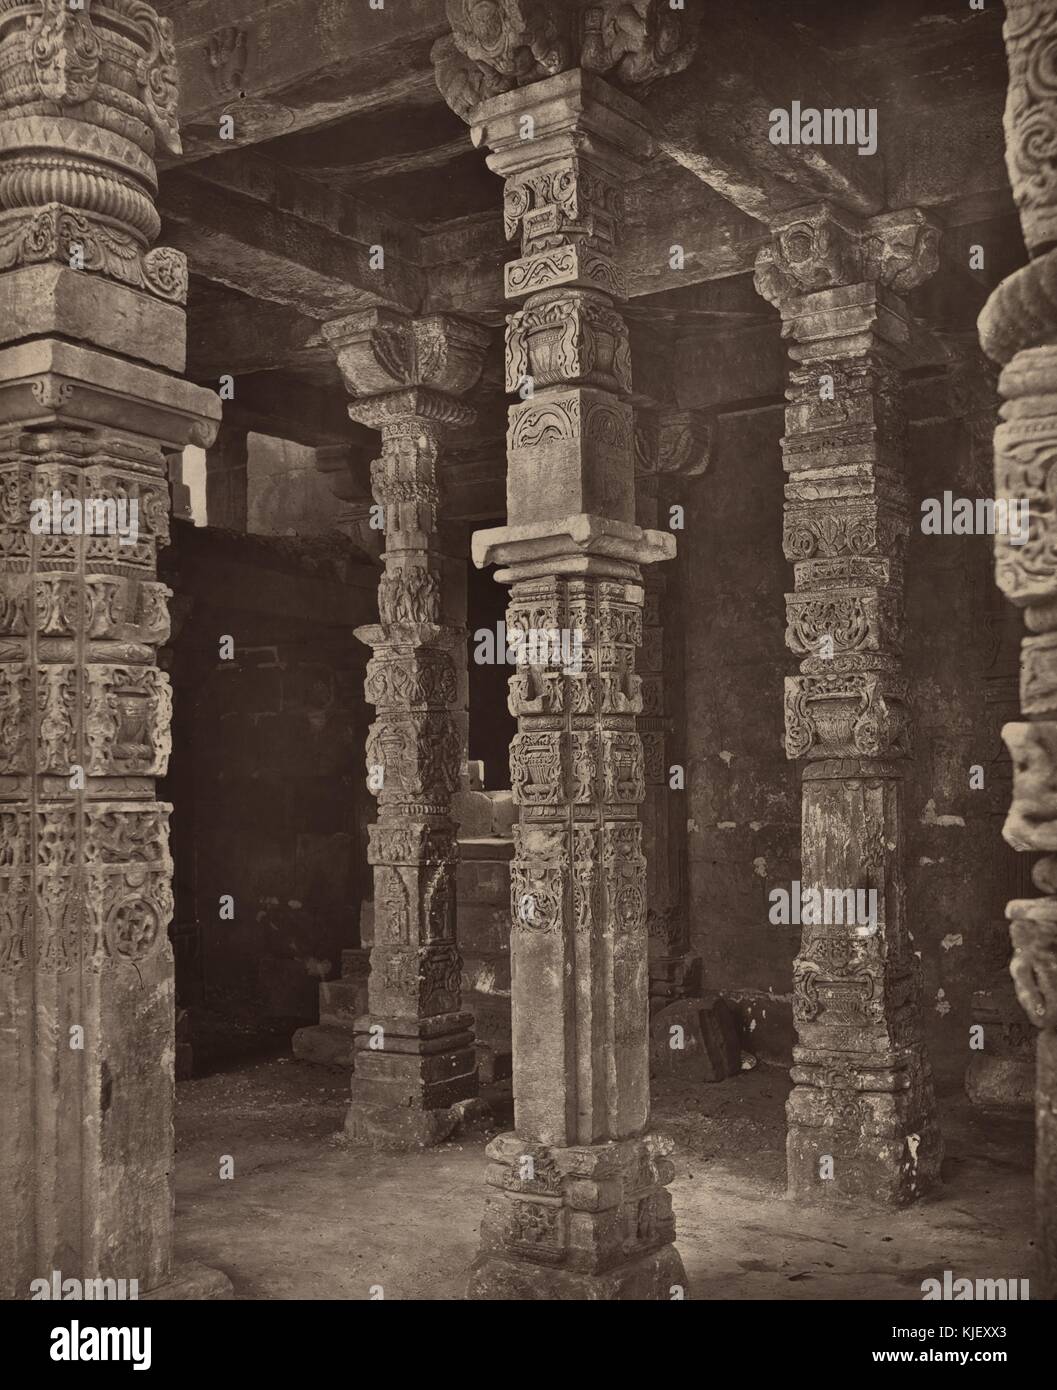 A photograph of a ancient pillars standing in the Qutb Complex, the complex consists of monuments and buildings built by many rules over many hundreds of years, the site is designated as a Uniseco World Heritage Site, Delhi, India, 1872. From the New York Public Library. Stock Photo